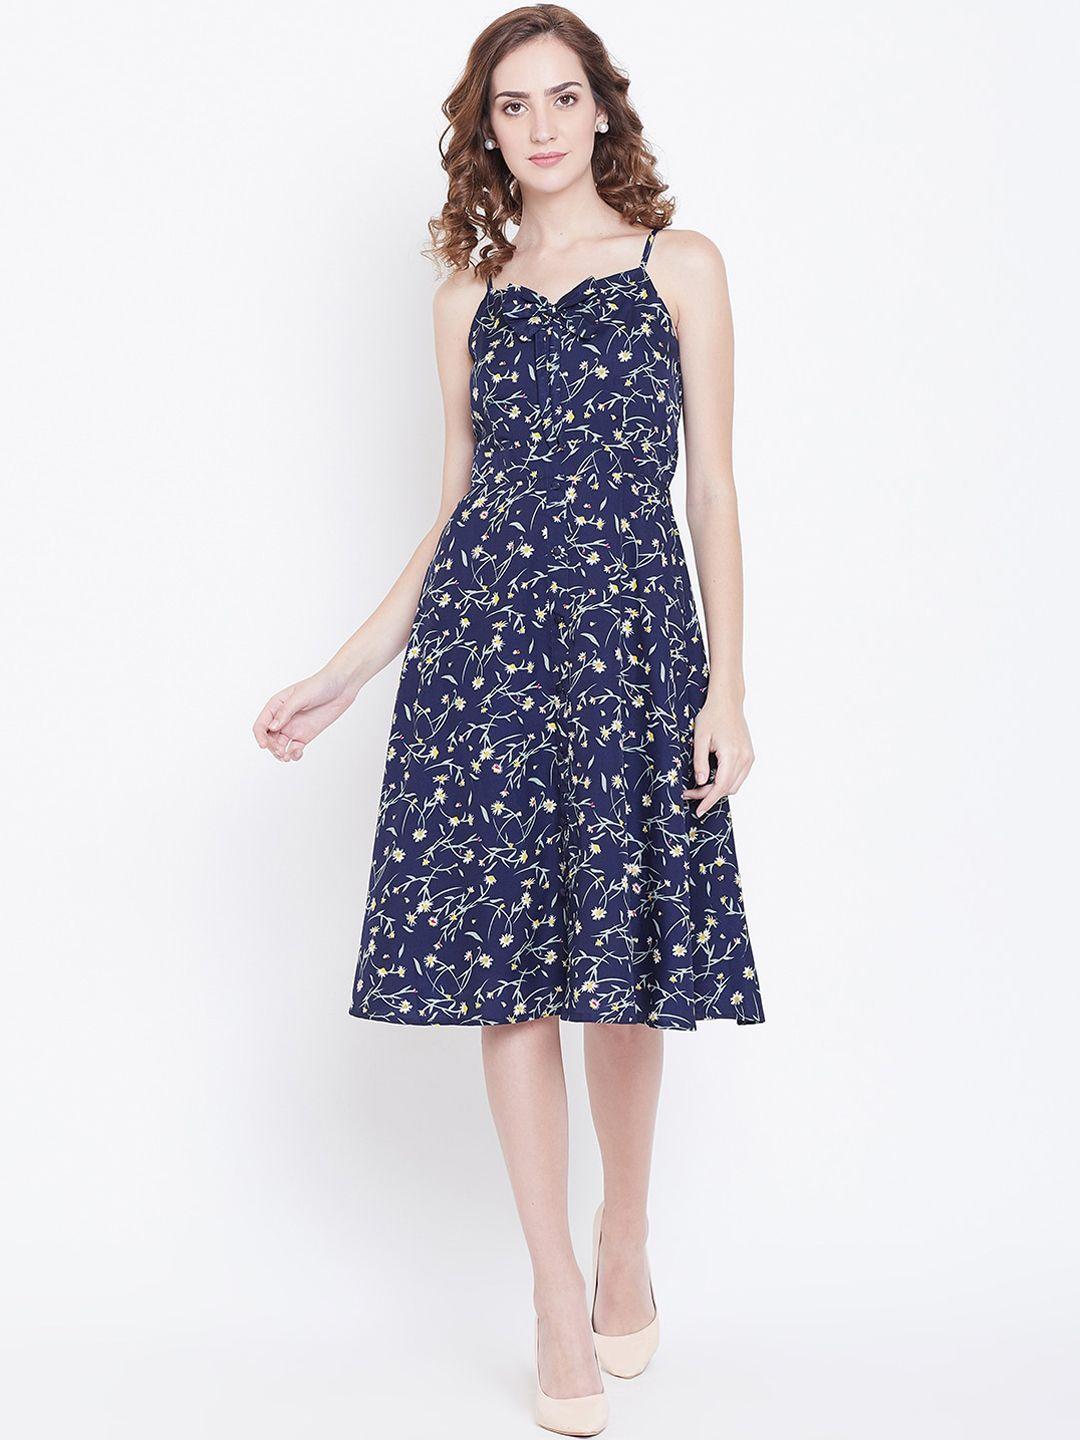 dodo-&-moa-women-navy-blue-printed-fit-and-flare-dress